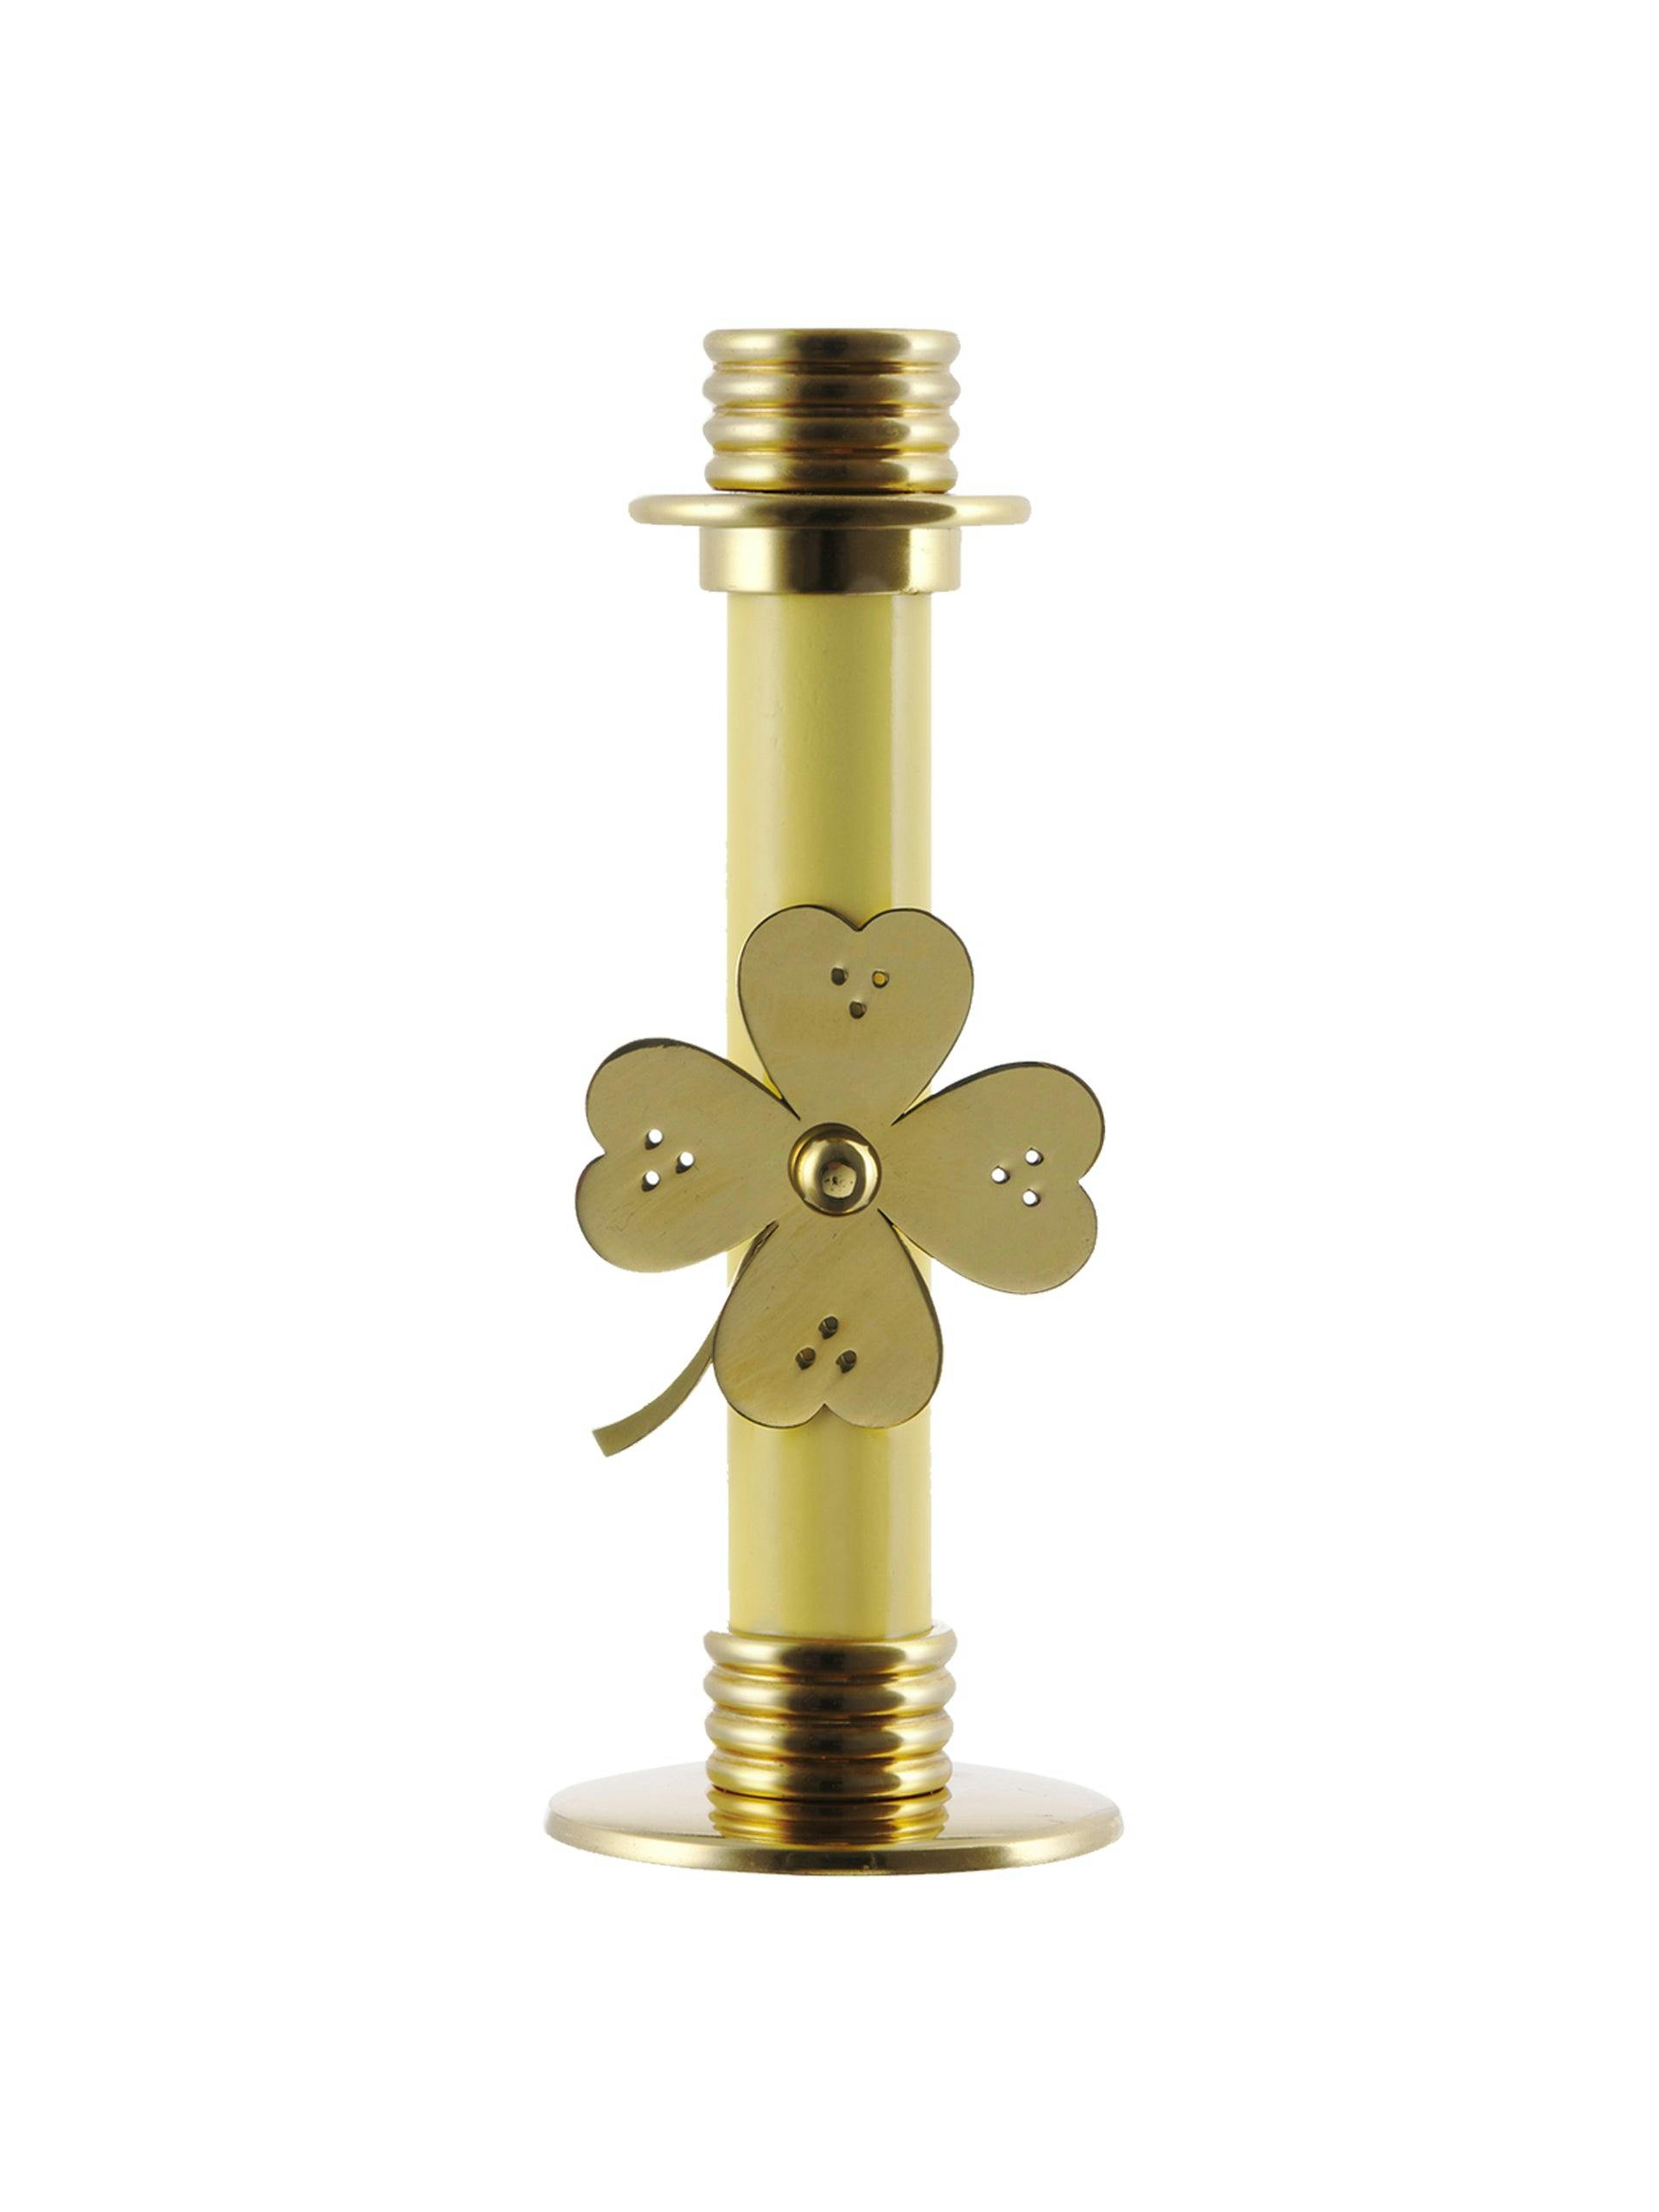 Lucky clover charm candle holder